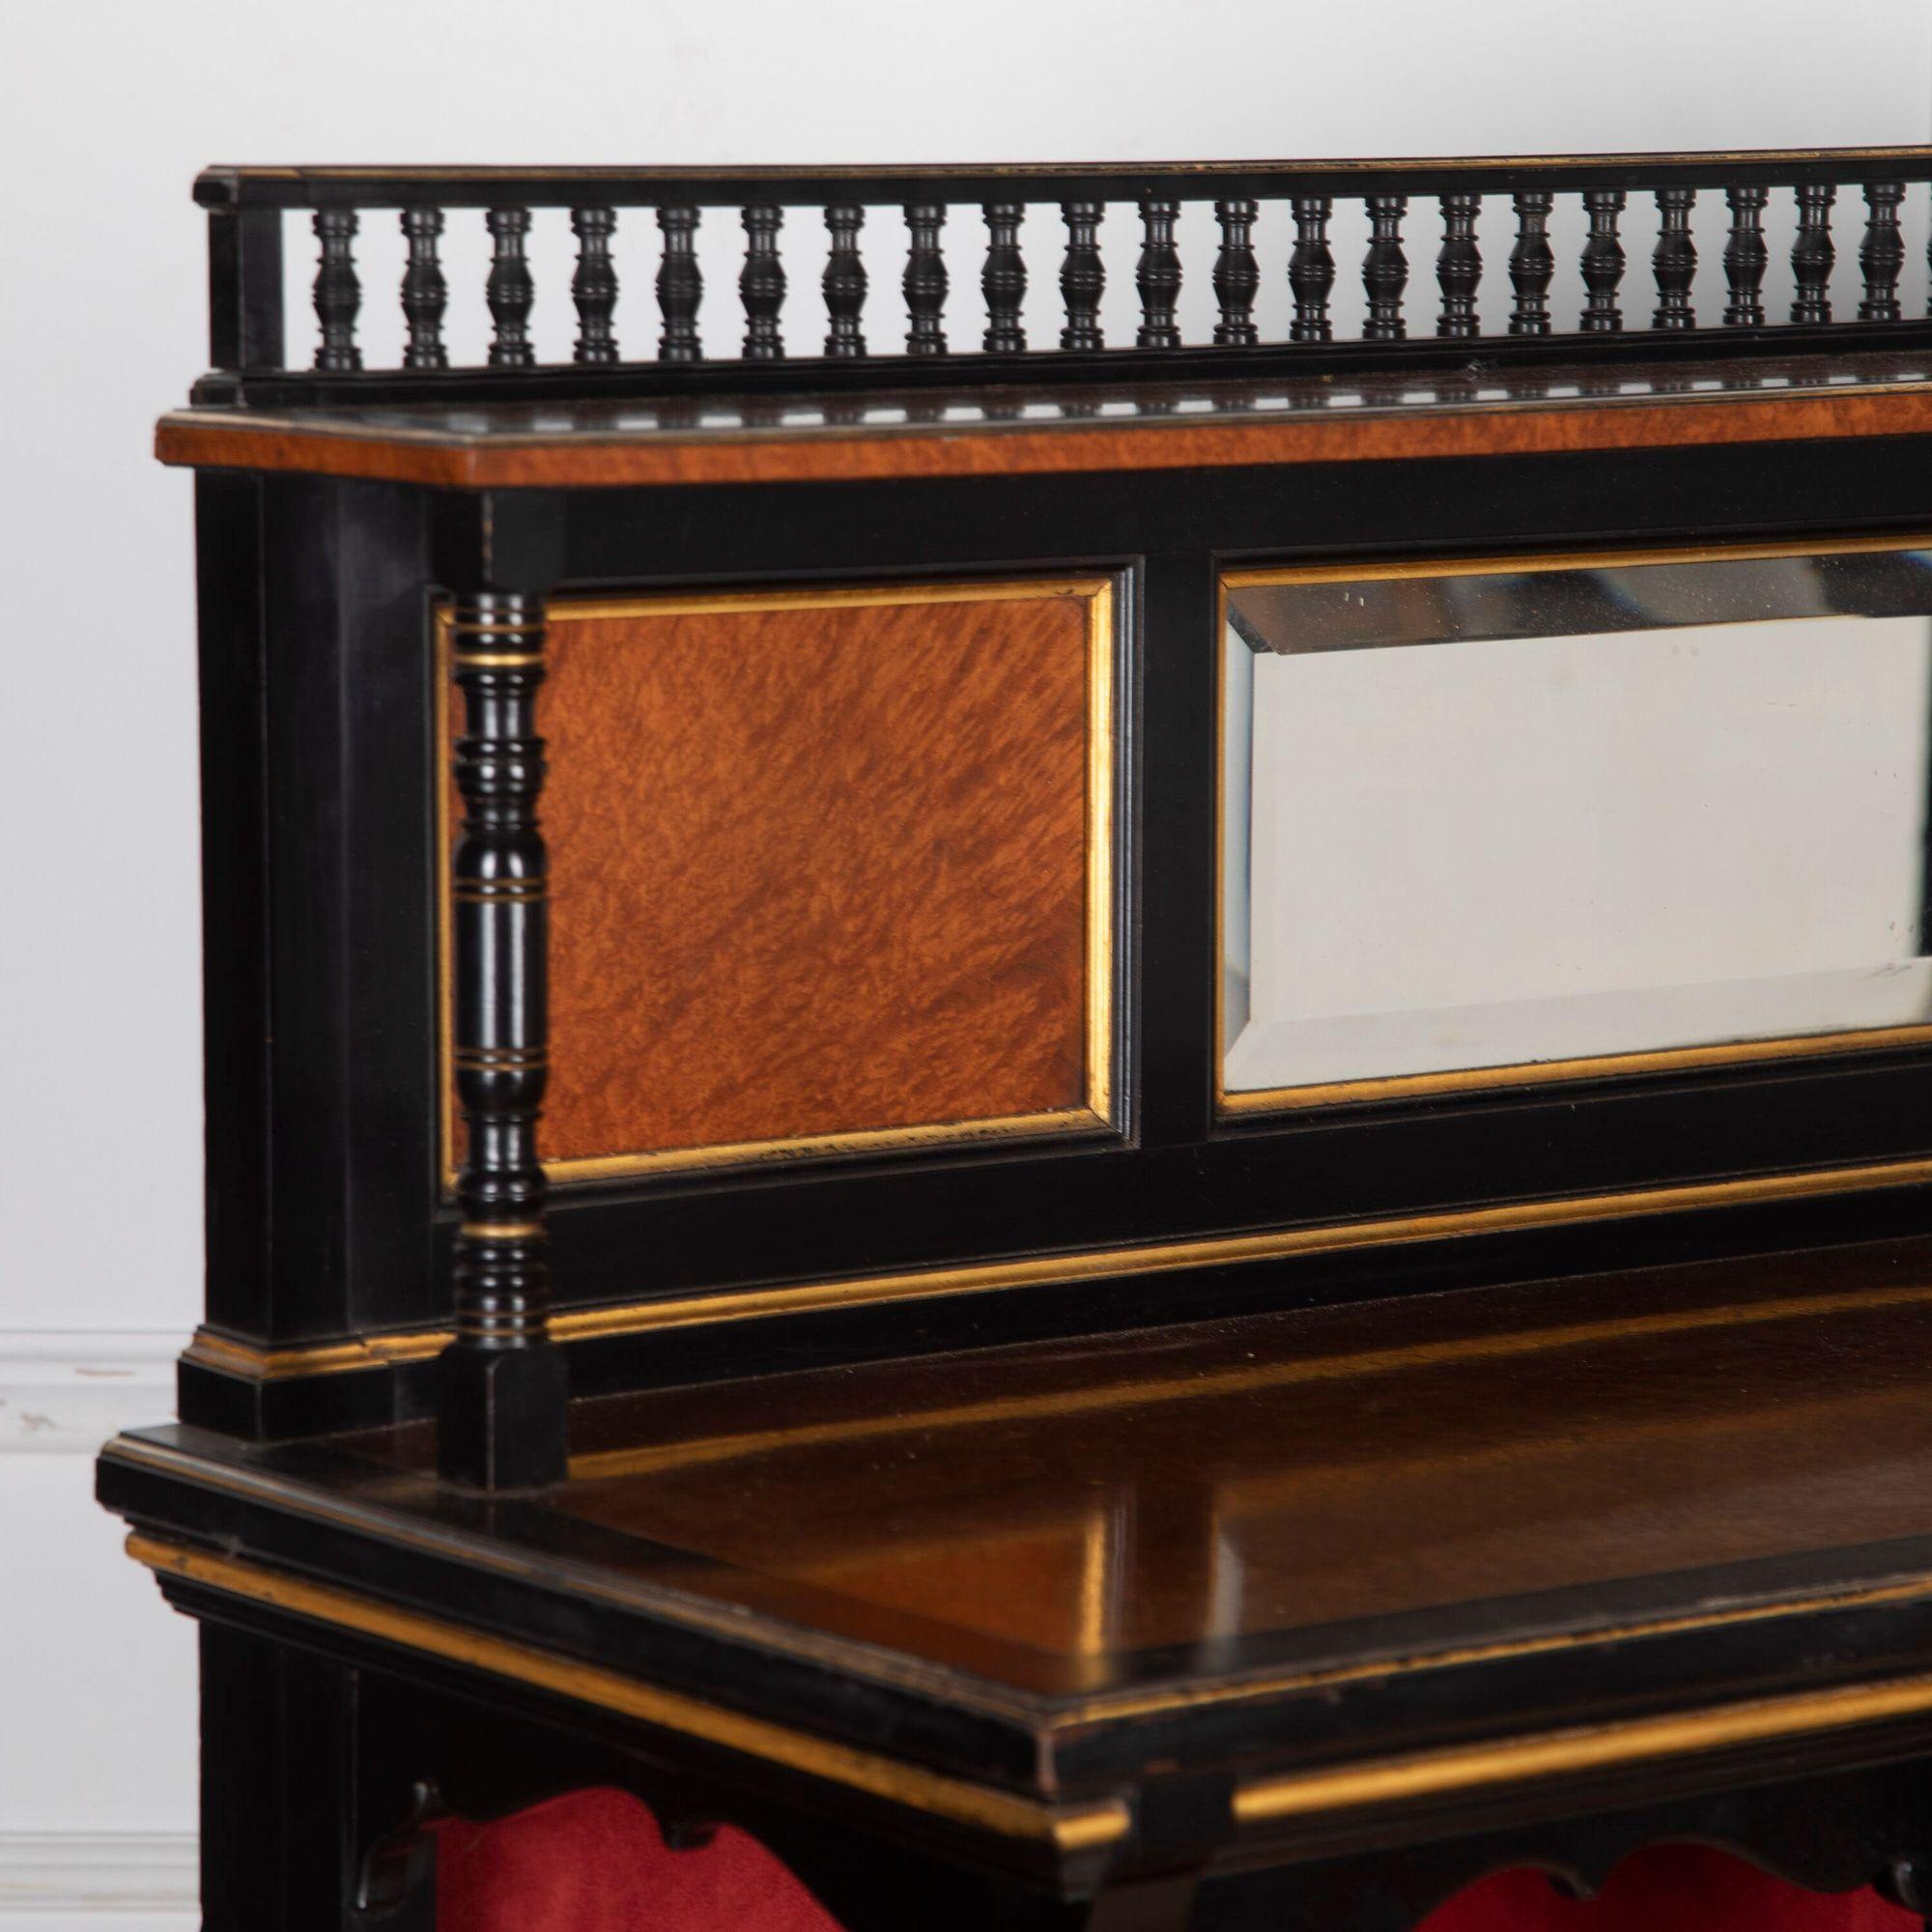 Fine quality late 19th Century Arts and Crafts ebonised and amboyna cabinet by Marsh Jones and Cribb.
The superstructure with a central mirror flanked by timber panels with a galleried shelf above. The base has a quarter-panelled door with a